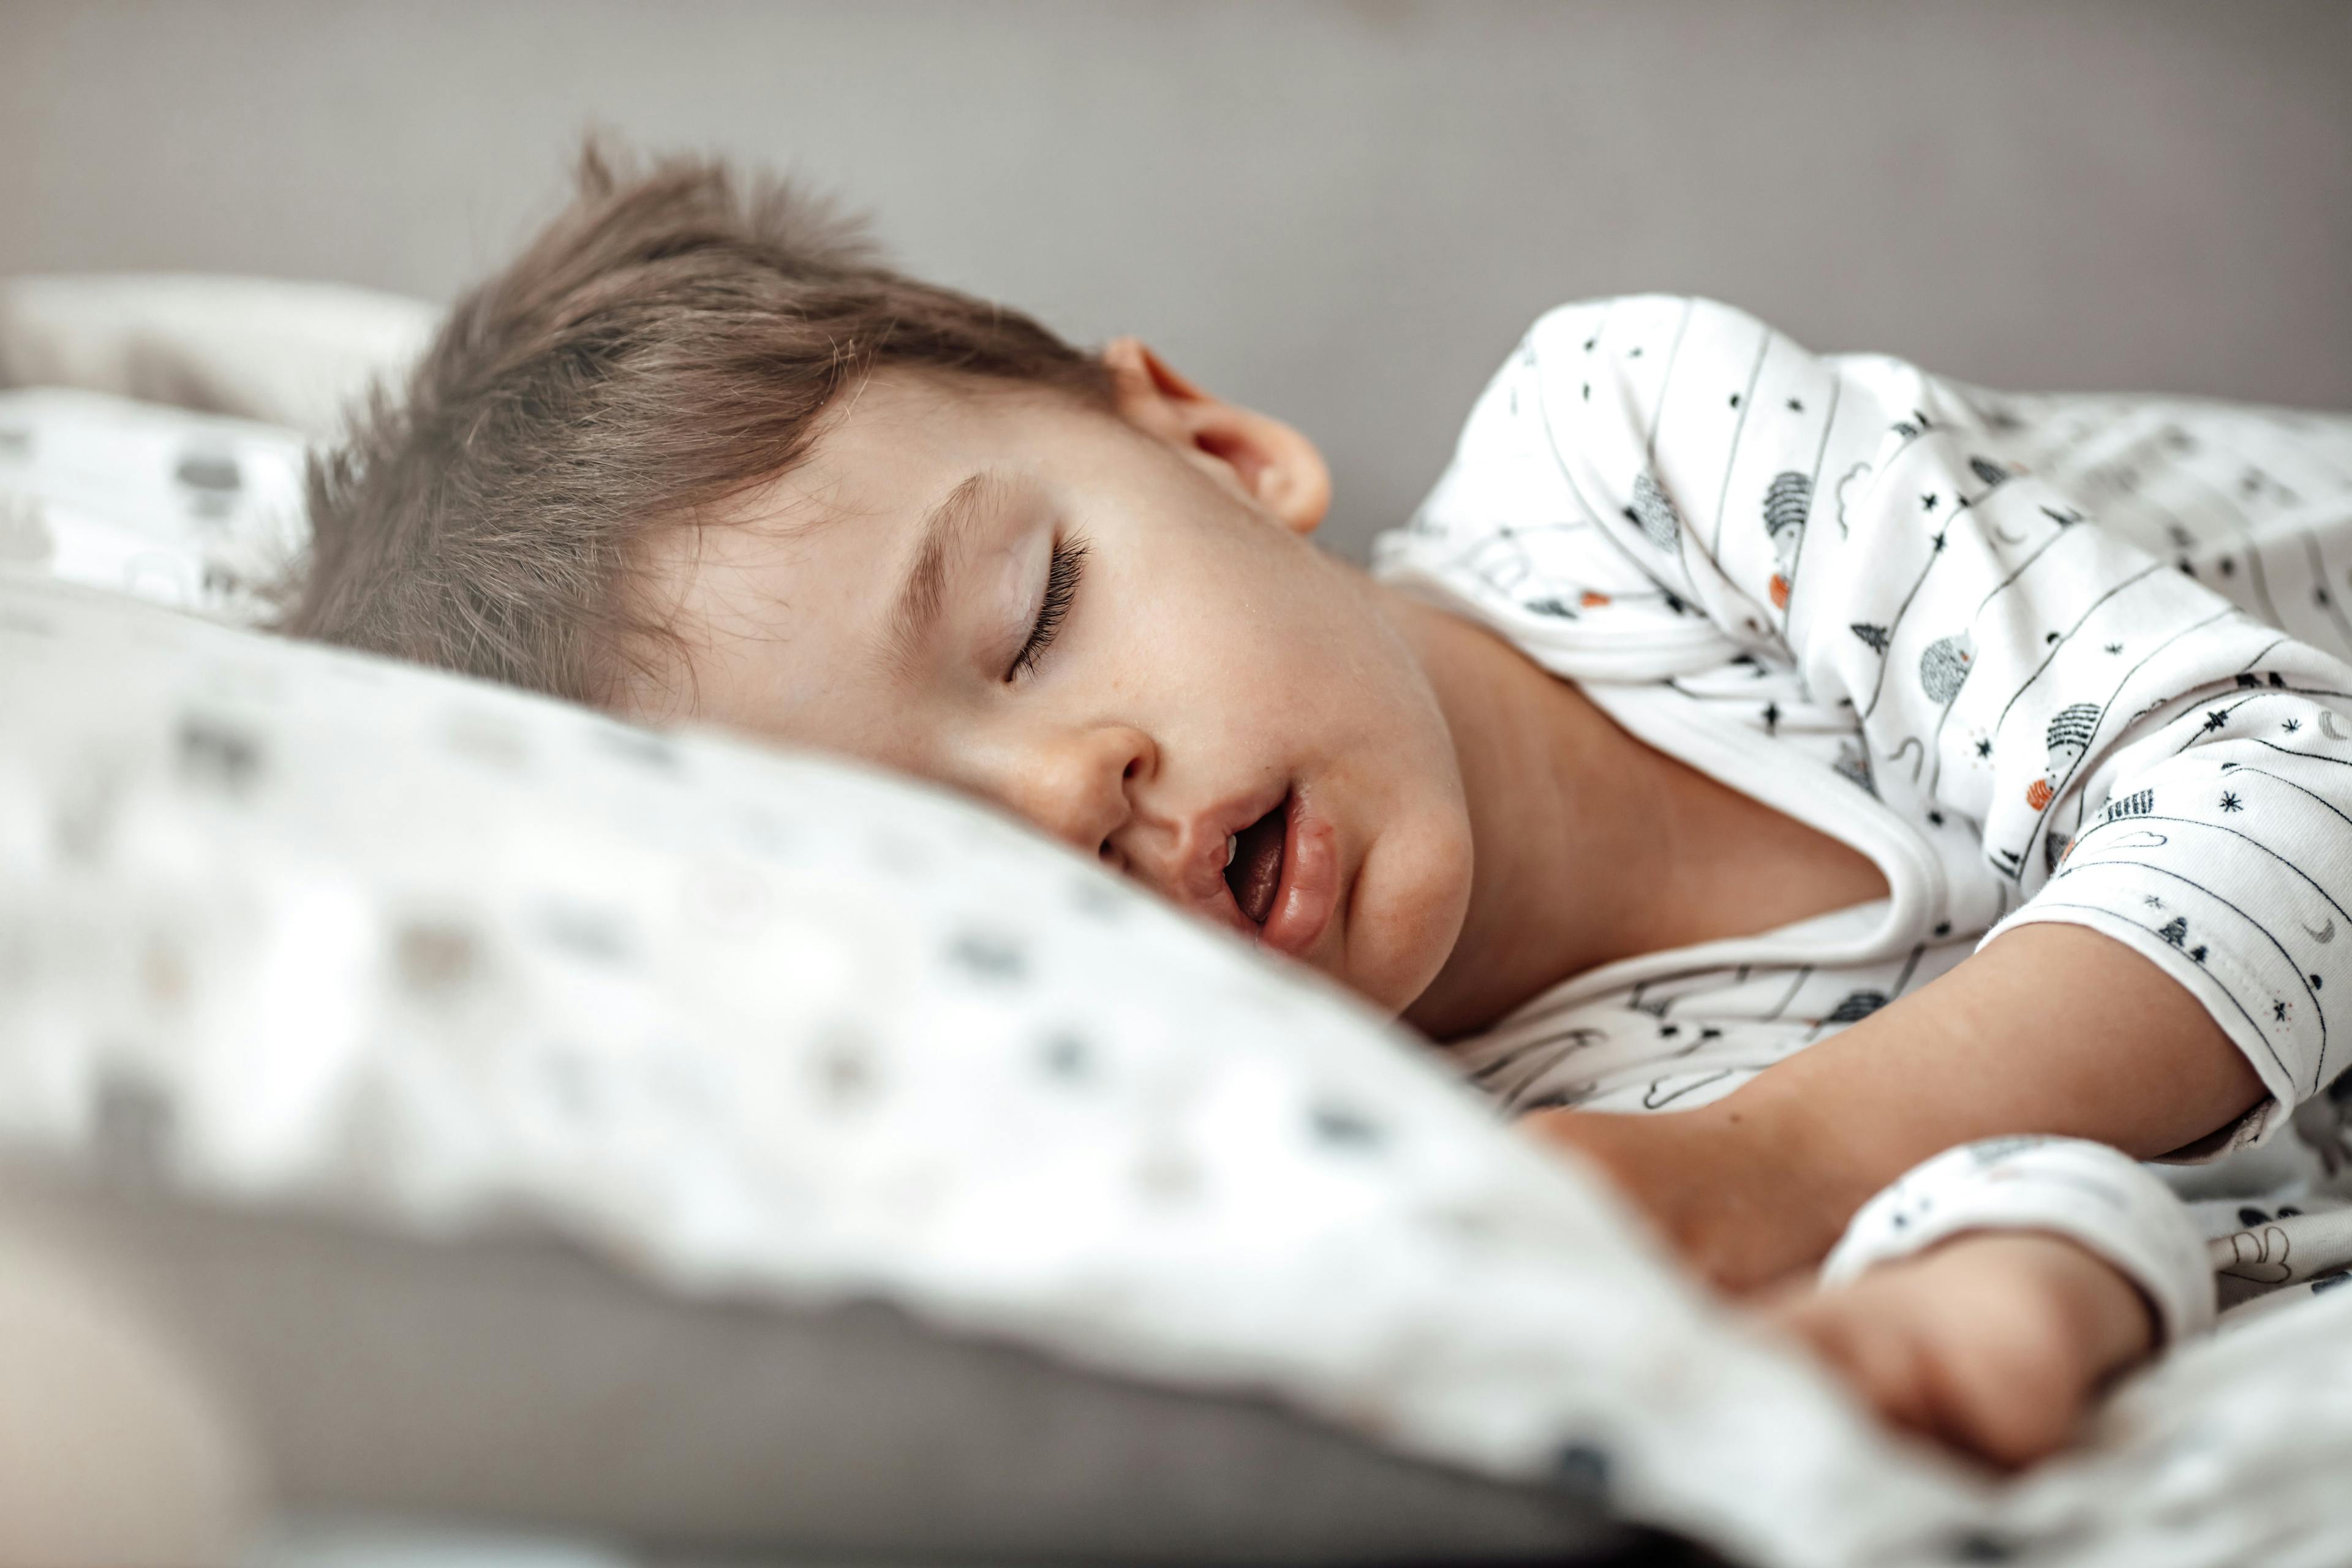 Children with Insufficient Sleep Have Neurocognitive Differences That Correlate with Mental Health Risk